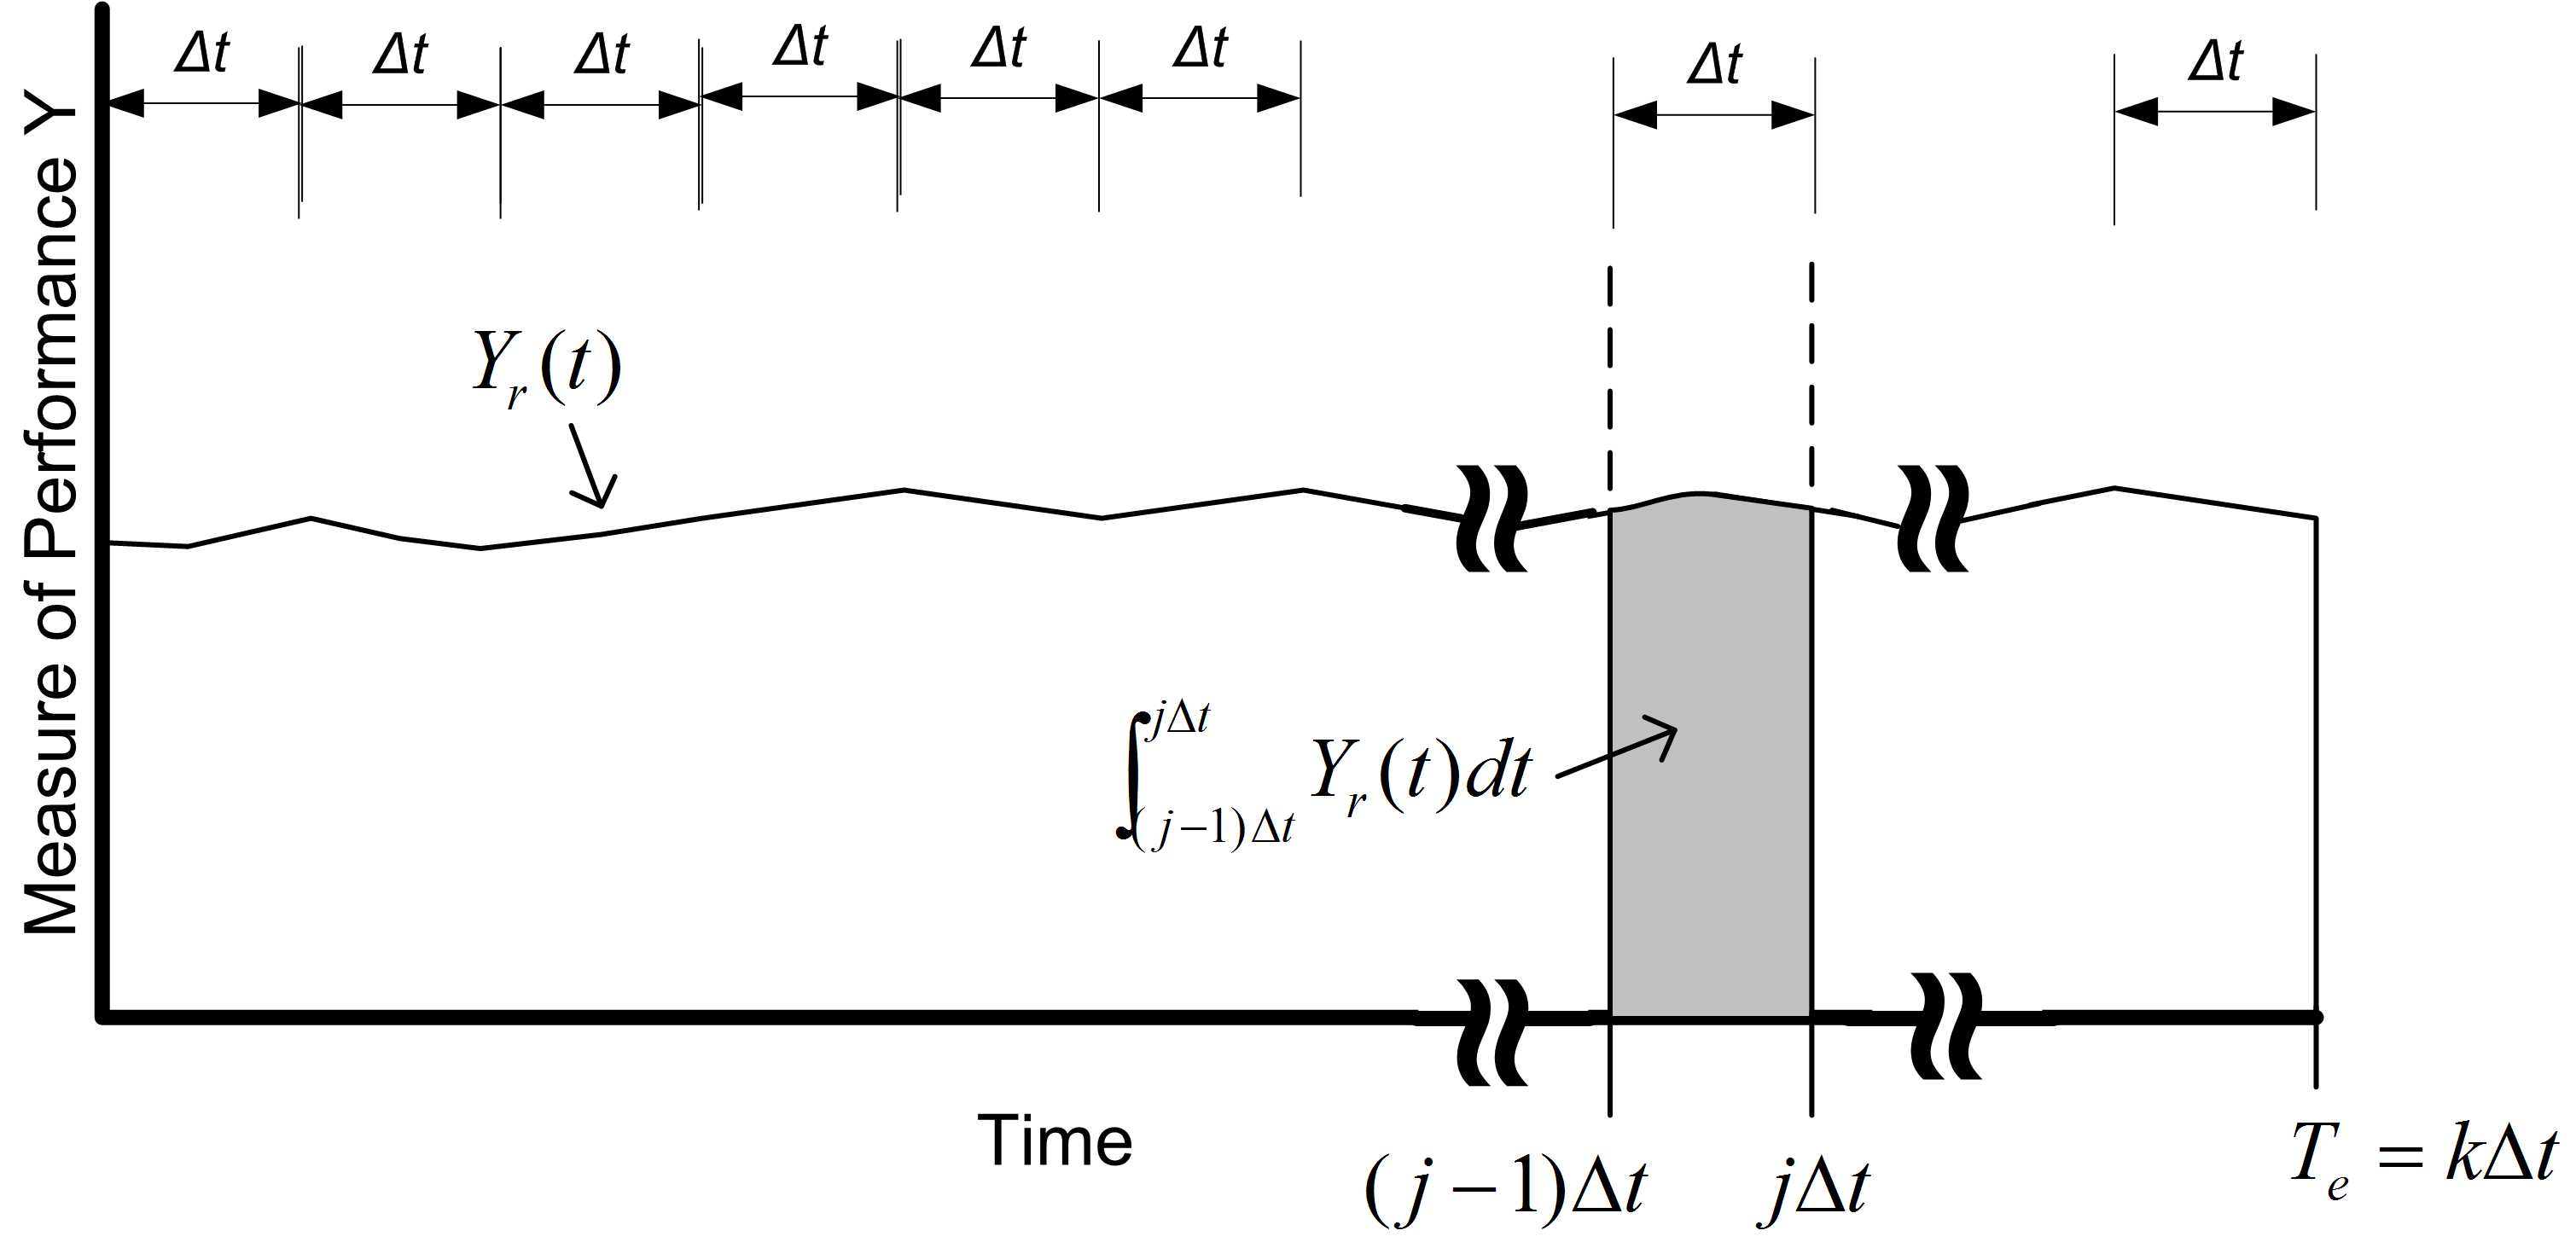 Discretizing time persistent observations